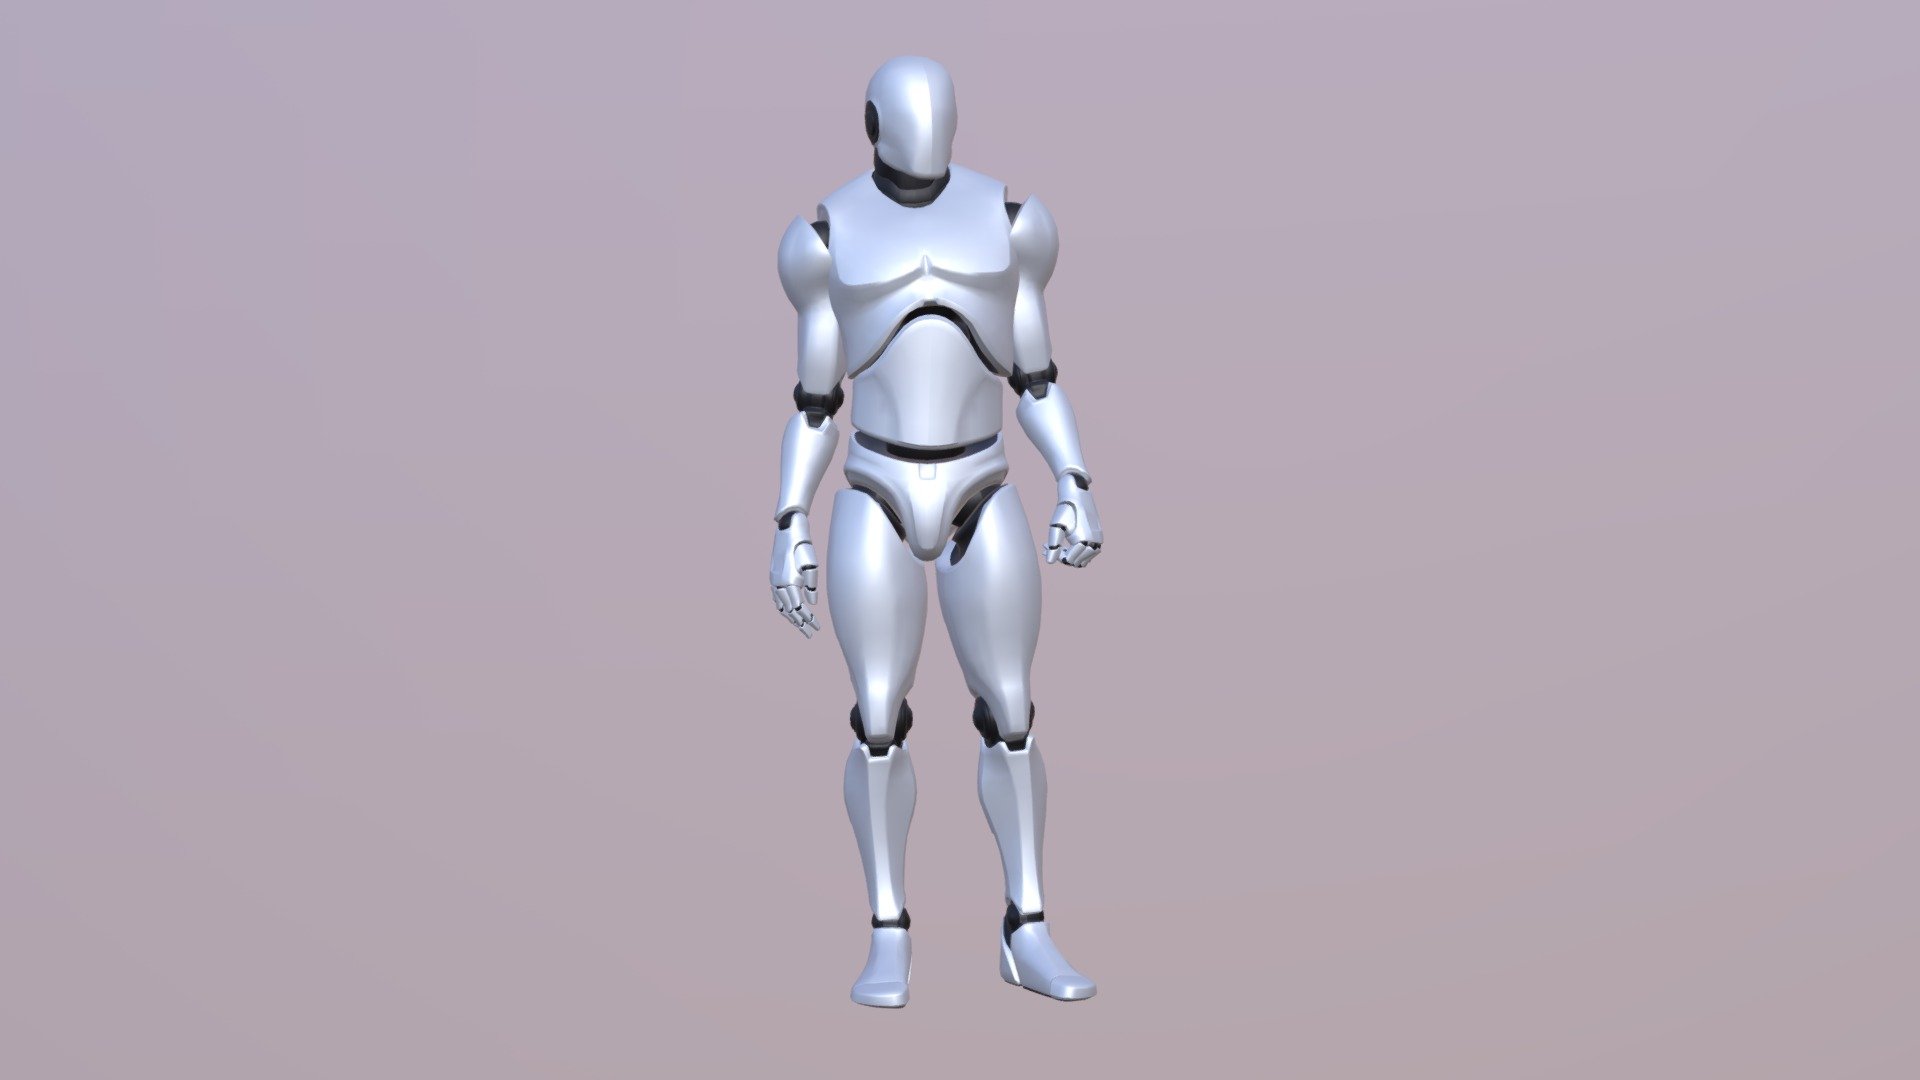 ANIMATION PREVIEW
* UE4- https://youtu.be/Qm3LGqizPfc
* UNITY- https://youtu.be/OdIQYjjNpzI

FOR FULL DETAILS+SKELETON TREE- LINK



YOU CAN ALSO DOWNLOAD SAME RIG CHARACTERS FROM MY STORE 
CHECK MY STORE FOR MORE ANIMATIONS,CHARACTERS,BASE MESH,OTHER 3D PRODUCTS


FEATURES




UNREAL MANNEQUIN, UNITY DEFAULT CHARACTER SUPPORT THIS ANIMATIONS

SKELETON : UNREAL ENGINE EPIC SKELETON (SKELETON TREE SHOWED IN THE ABOVE LINK)  

NUMBER OF ANIMATIONS :50   

ANIMATIONS TYPE : AVAILABLE IN BOTH ROOT MOTION &amp; IN PLACE

AVAILABLE SKIN POSES: T-POSE,UE4-POSE,A-POSE

ANIMATIONS AVAILABLE FILE FORMATS




UNREAL ENGINE-4.25

UNITY-2022

FBX

CHARACTER  AVAILABLE FILE FORMATS




UNREAL ENGINE-4.25

UNITY-2022

3DS MAX-2017

MAYA-2017

BLENDER-3.2

CINEMA 4D-R21

FBX-BOTH Z-UP &amp; Y-UP

NB:PLEASE DOWNLOAD FULL FILES - 50 Male Animations - Buy Royalty Free 3D model by jasirkt 3d model